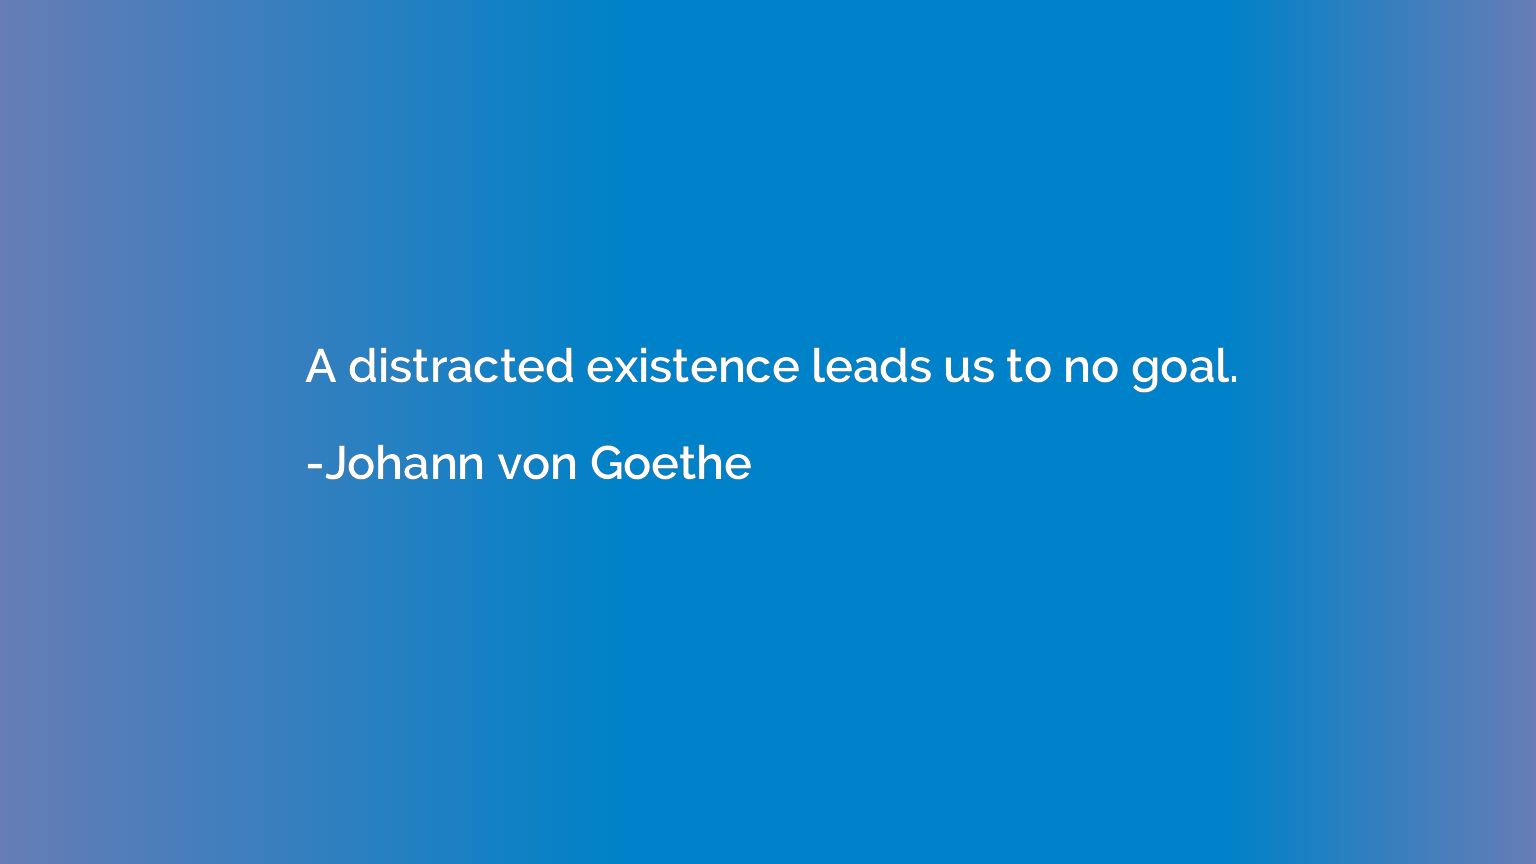 A distracted existence leads us to no goal.